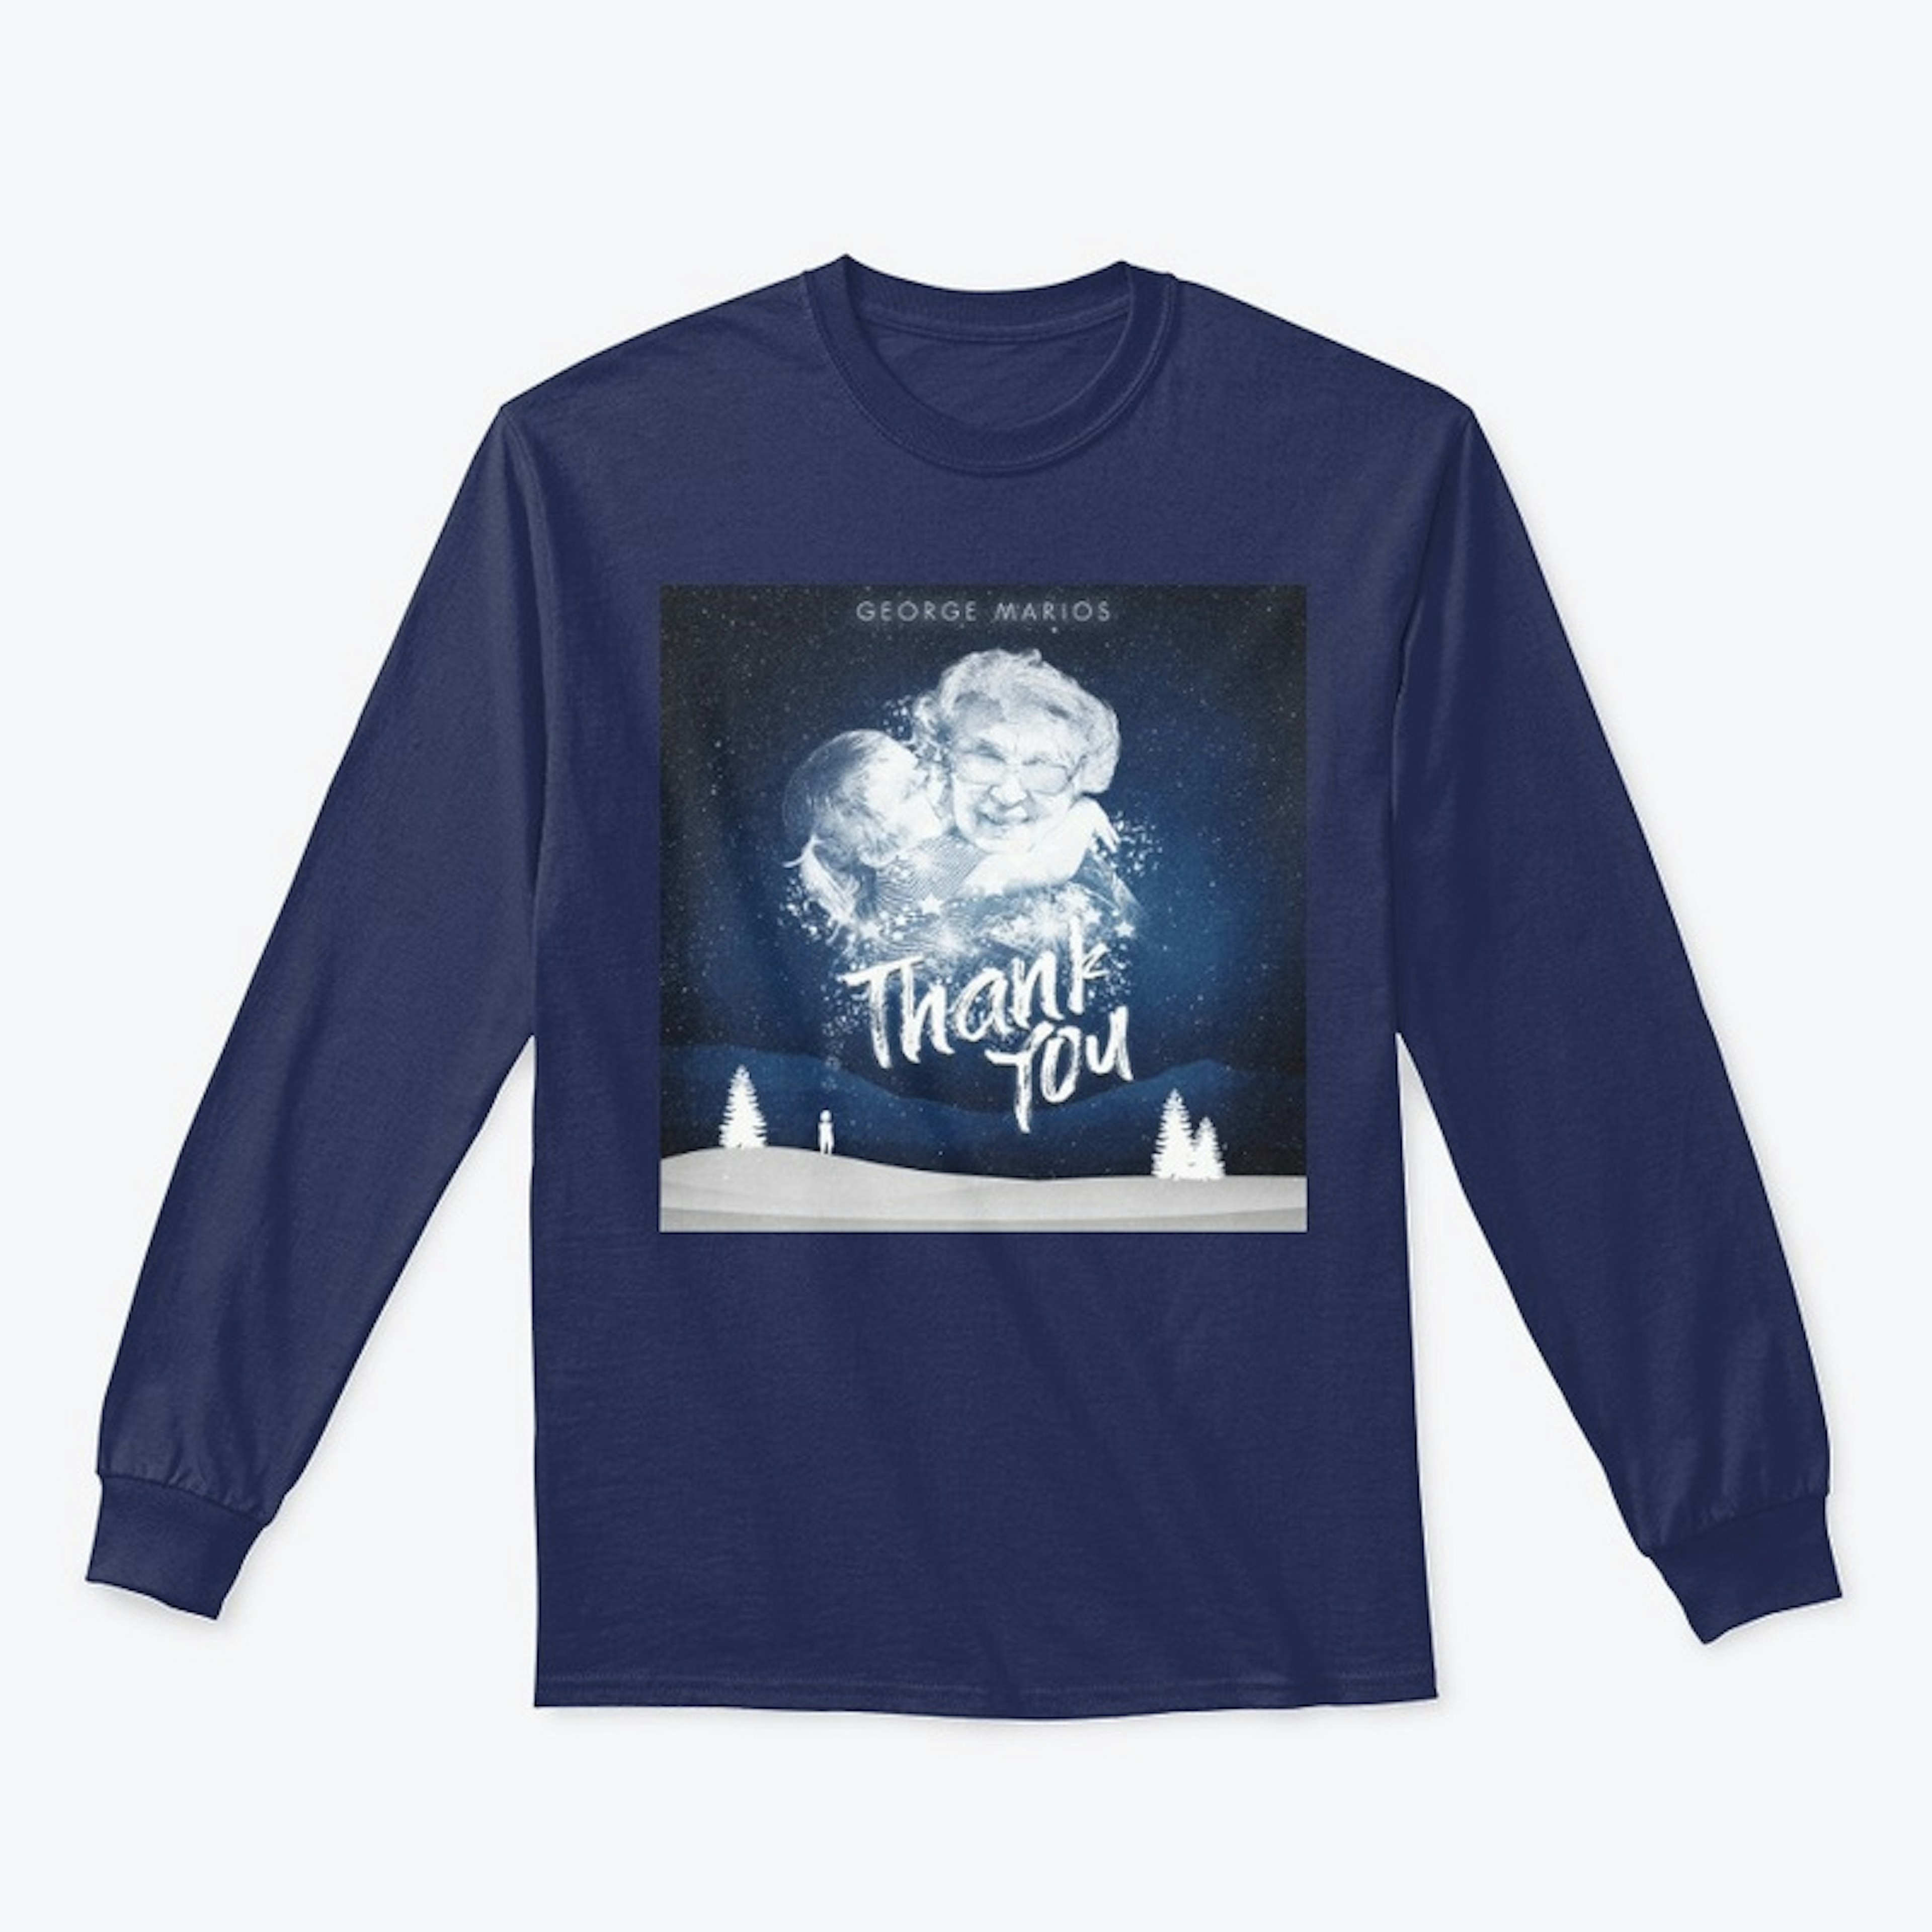 "Thank You" Long-Sleeve Top